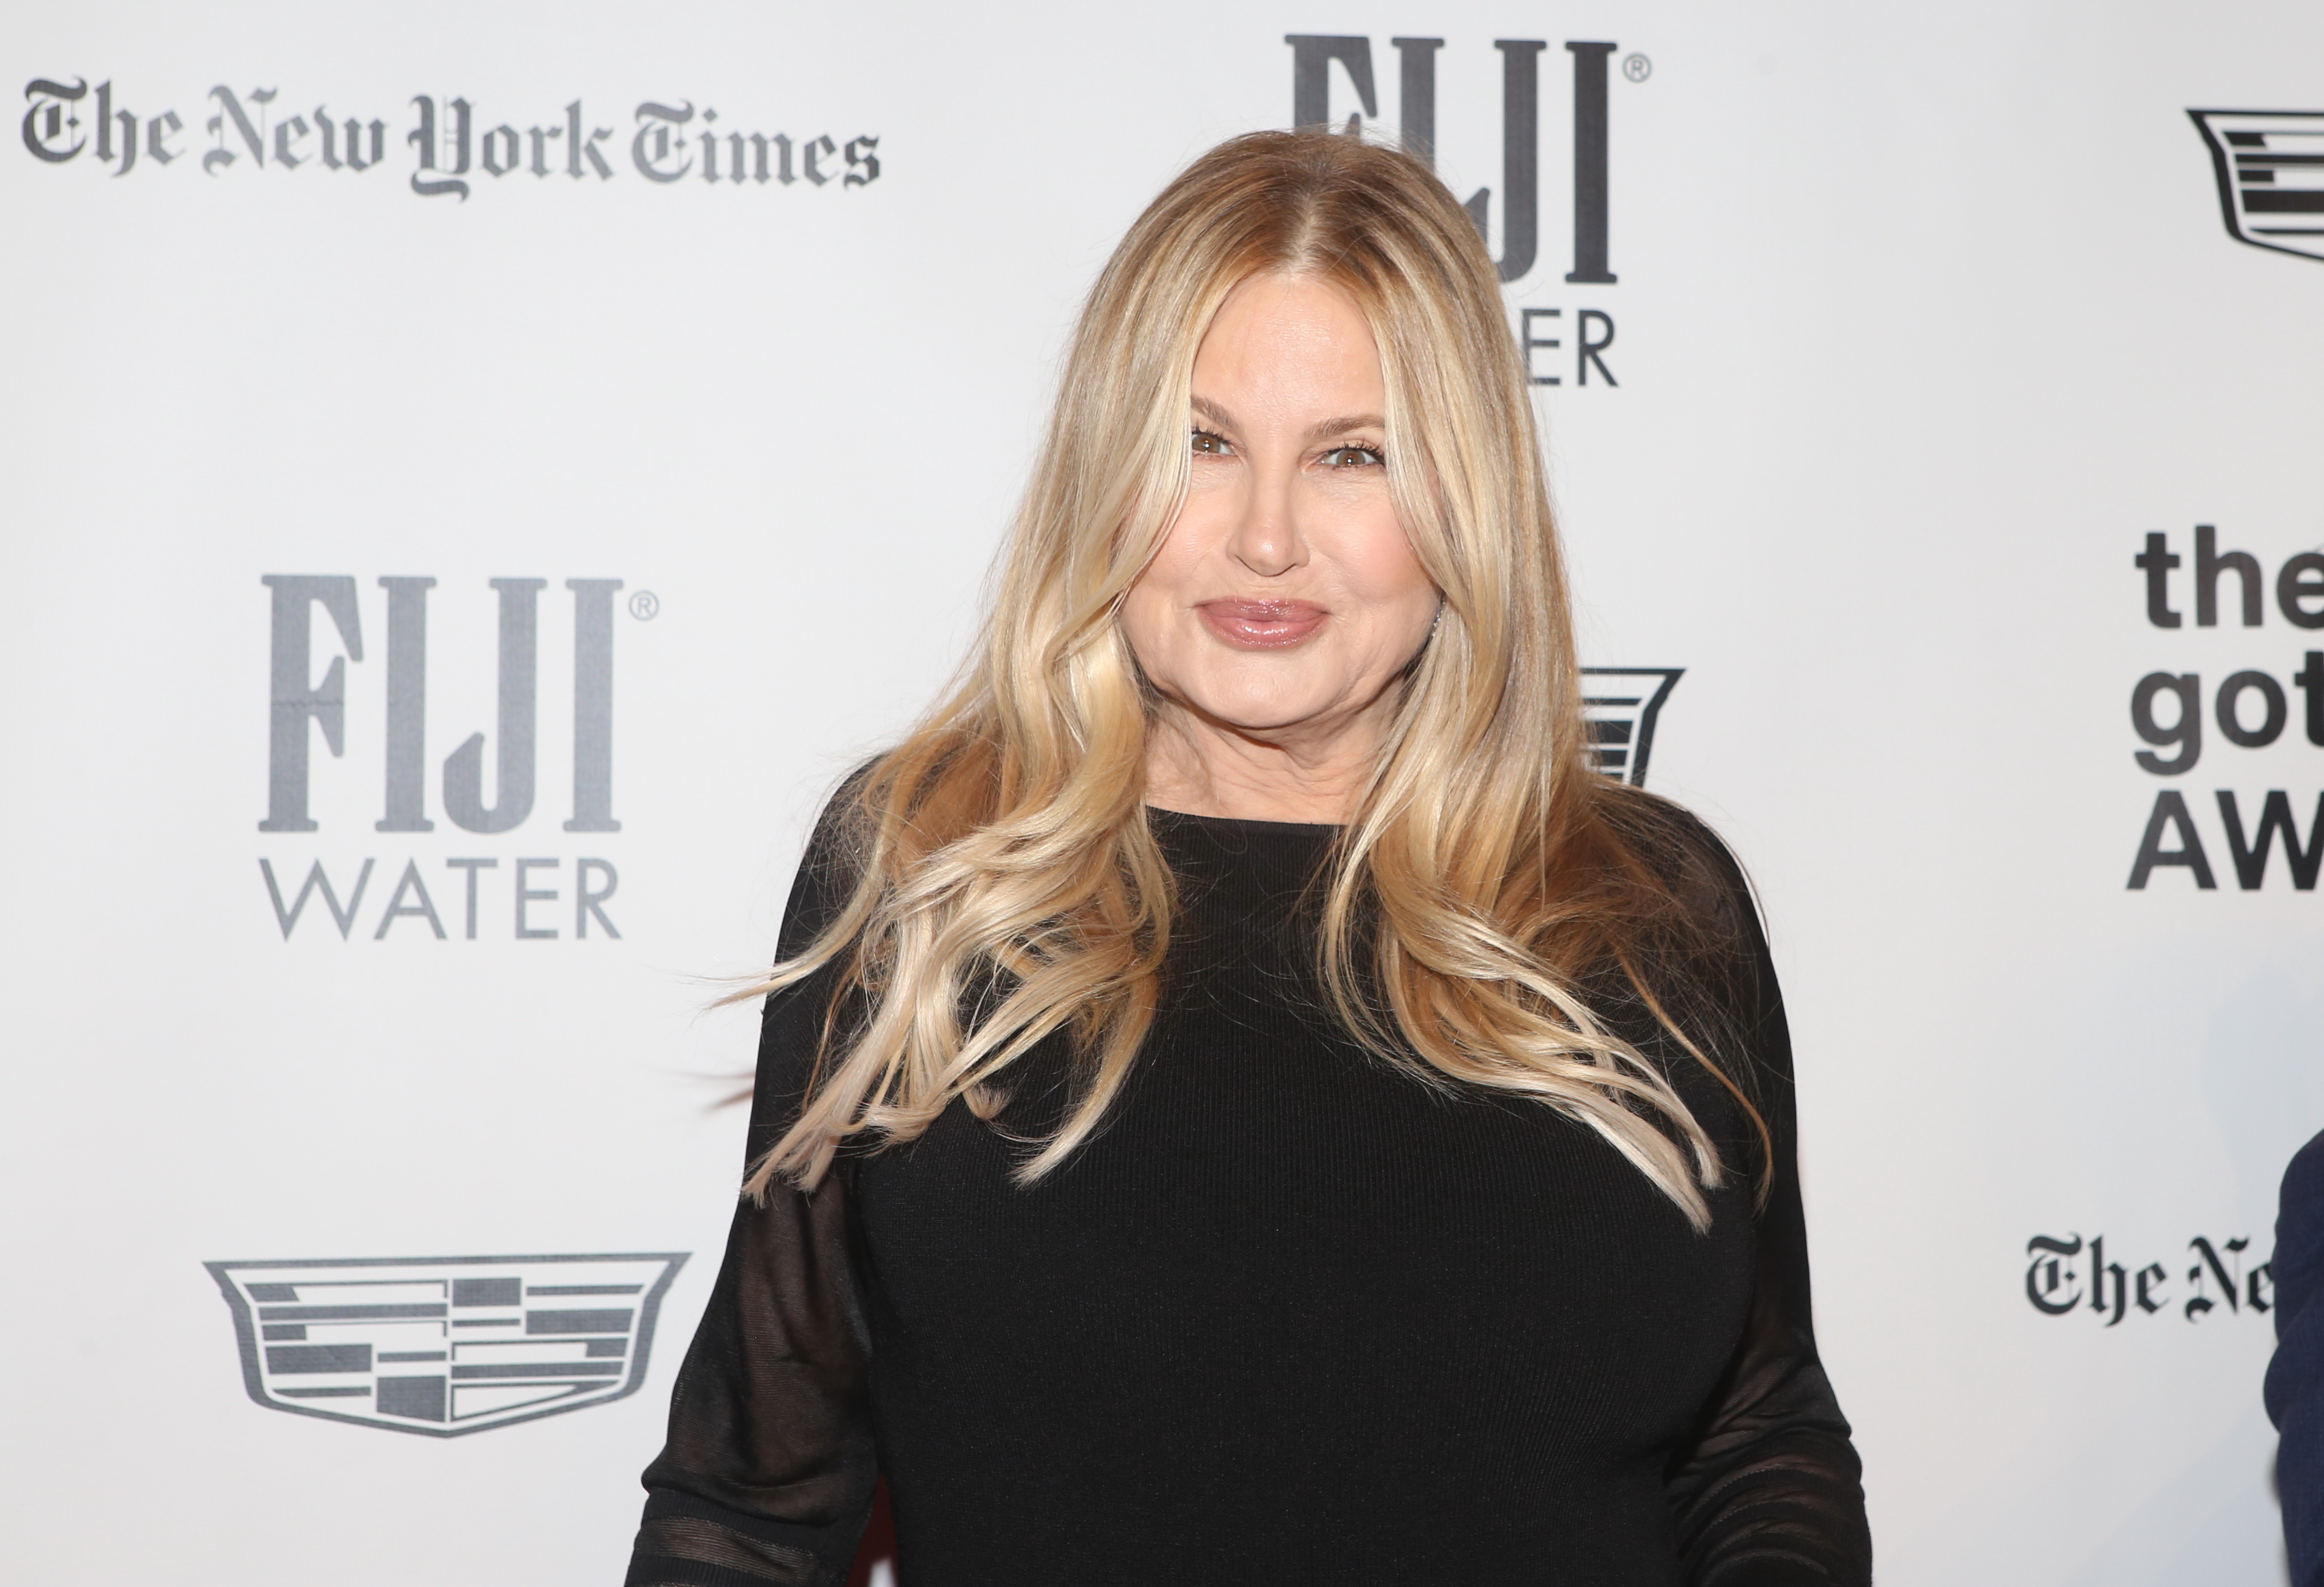 Jennifer Coolidge attends the 2021 Gotham Awards Presented By The Gotham Film & Media Institute at Cipriani Wall Street